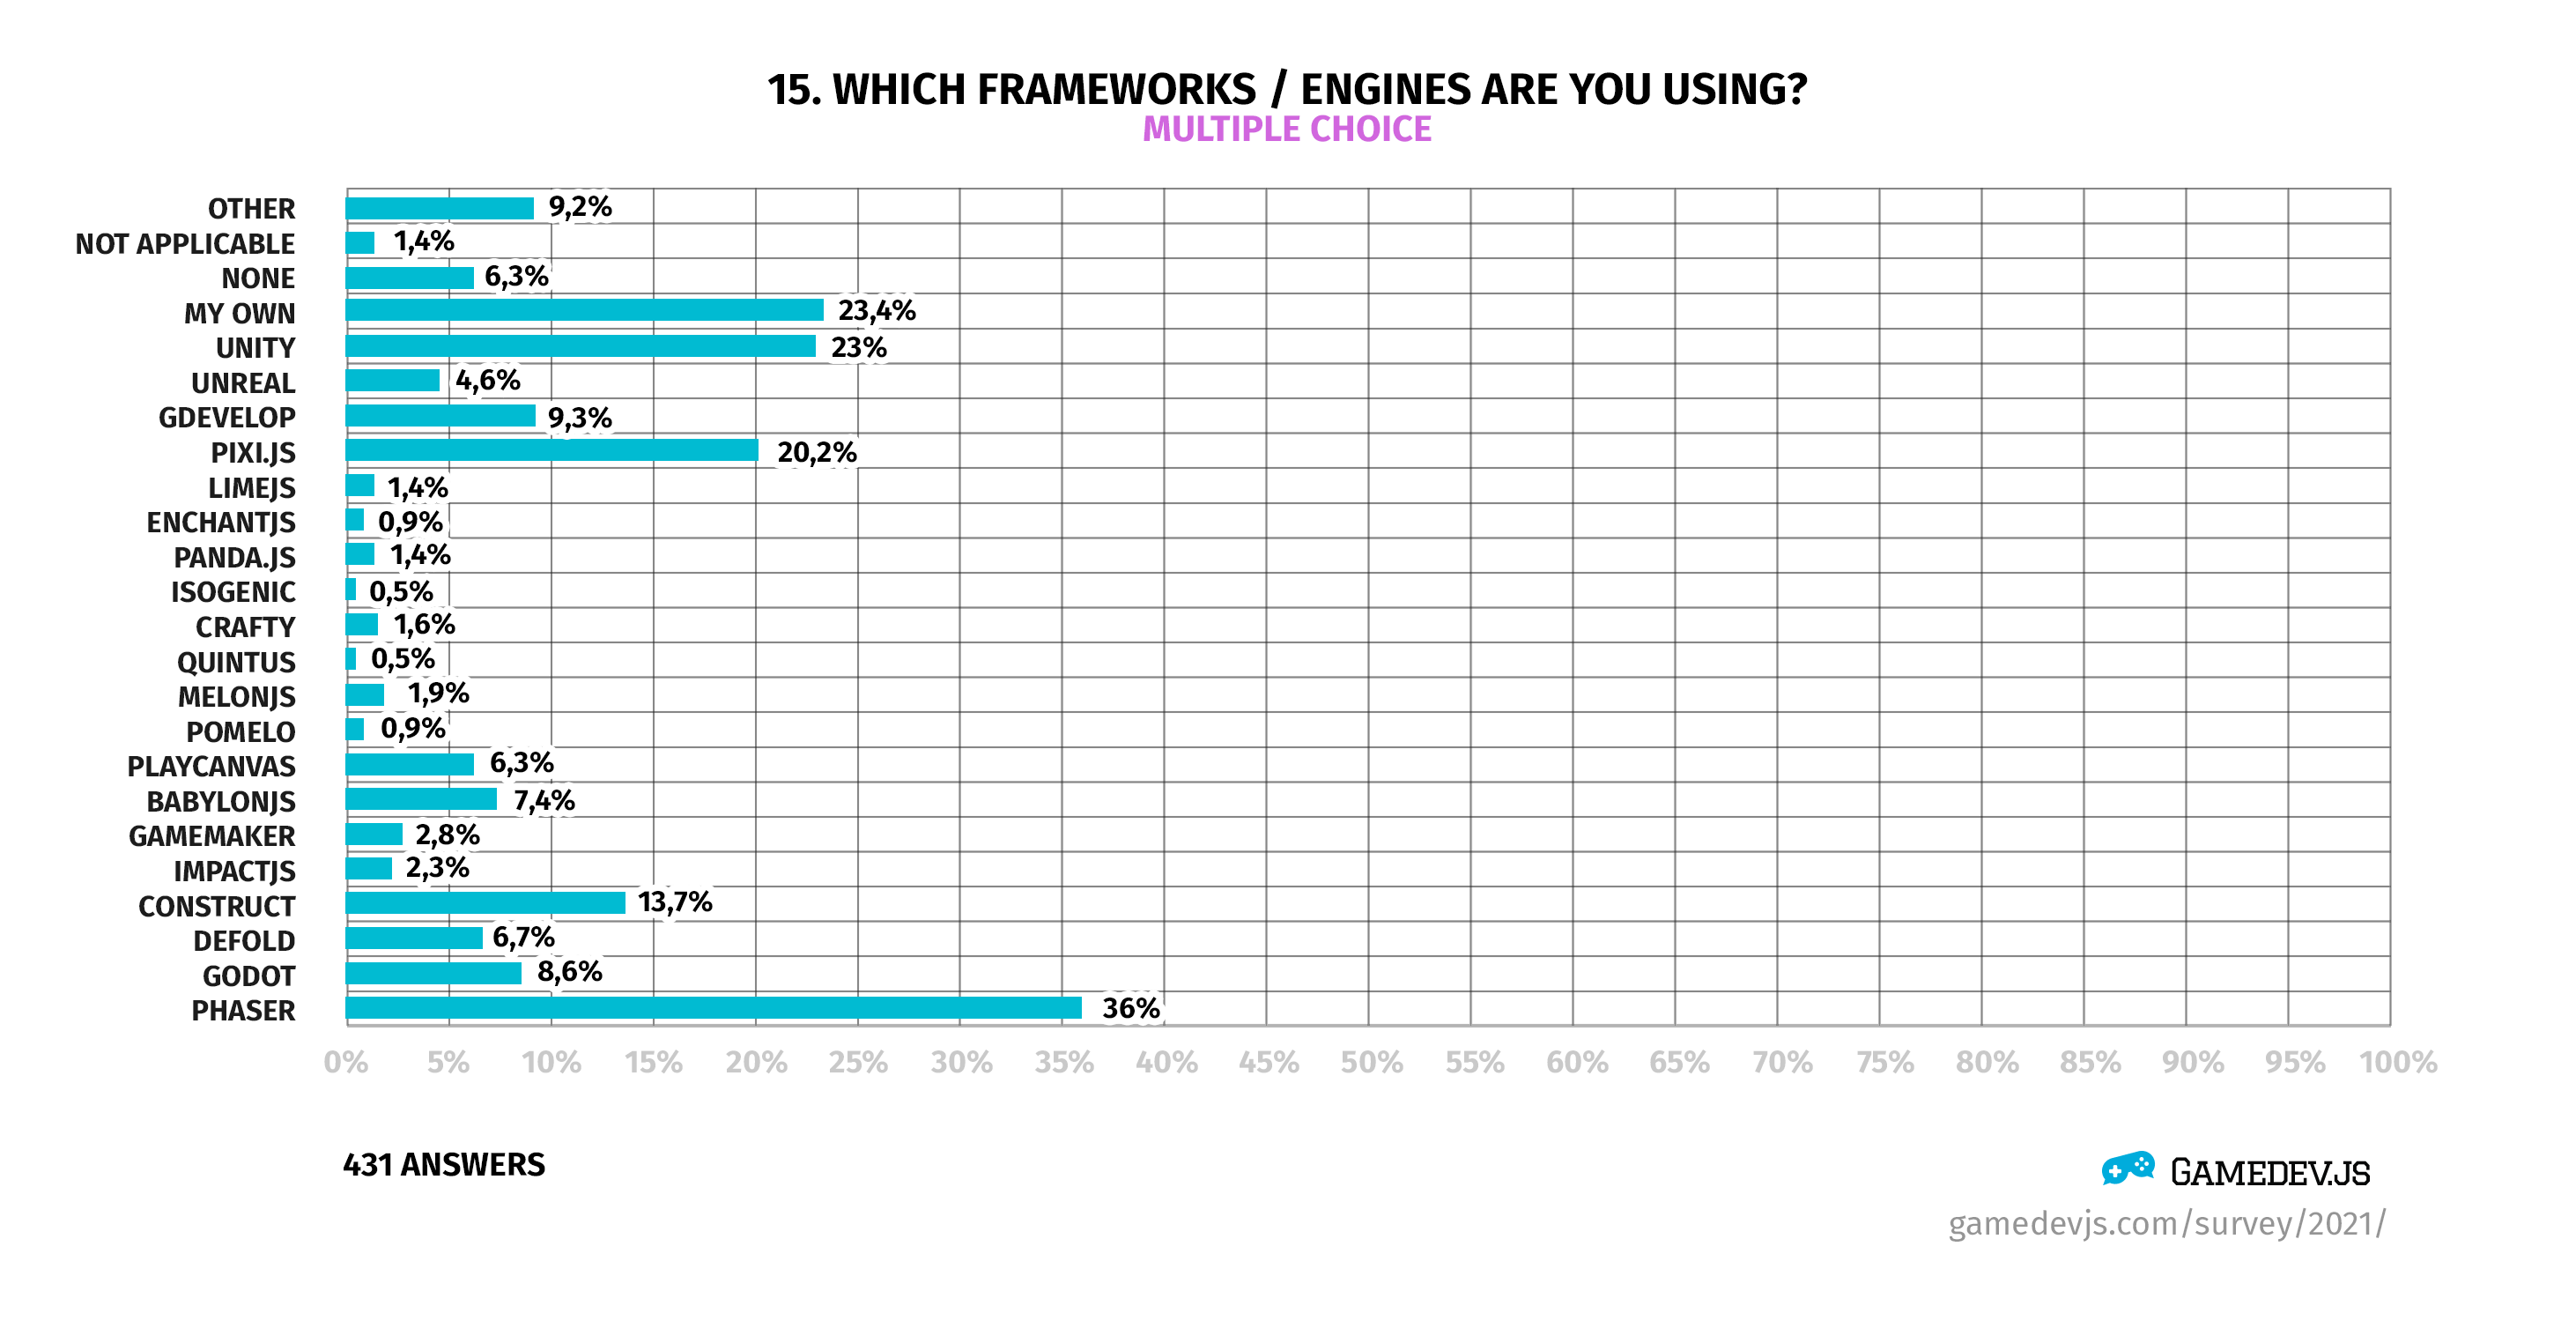 Gamedev.js Survey 2021 - Question #15: Which frameworks / engines are you using?